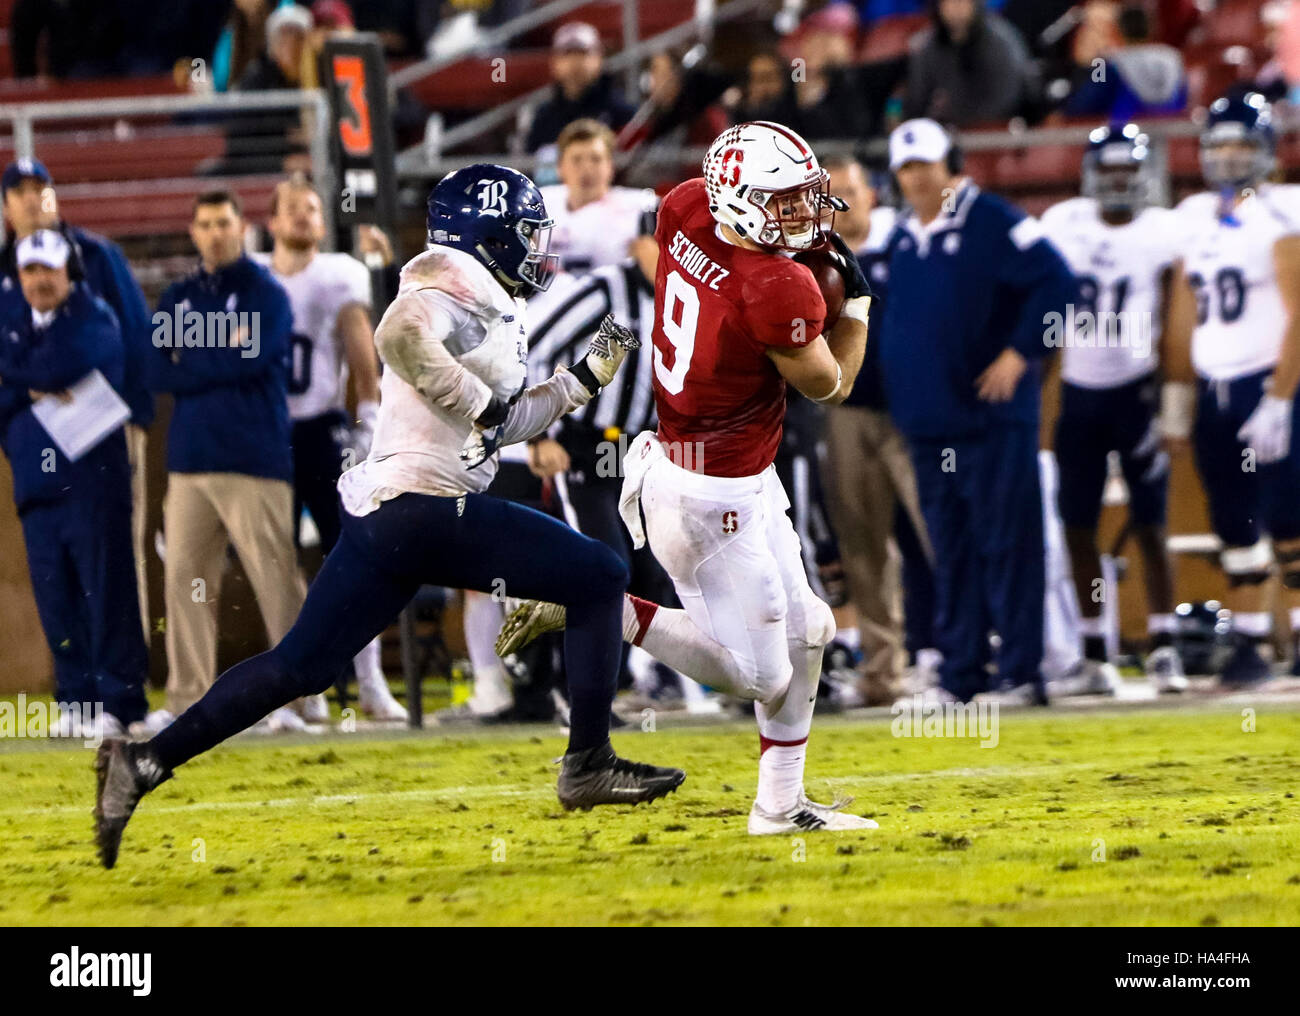 Palo Alto, California, USA. 26th Nov, 2016. Stanford Tight End Dalton Schultz (9) runs after a catch in NCAA football action at Stanford University, featuring the Rice Owls visiting the Stanford Cardinal. Stanford won the game 41-17. © Seth Riskin/ZUMA Wire/Alamy Live News Stock Photo